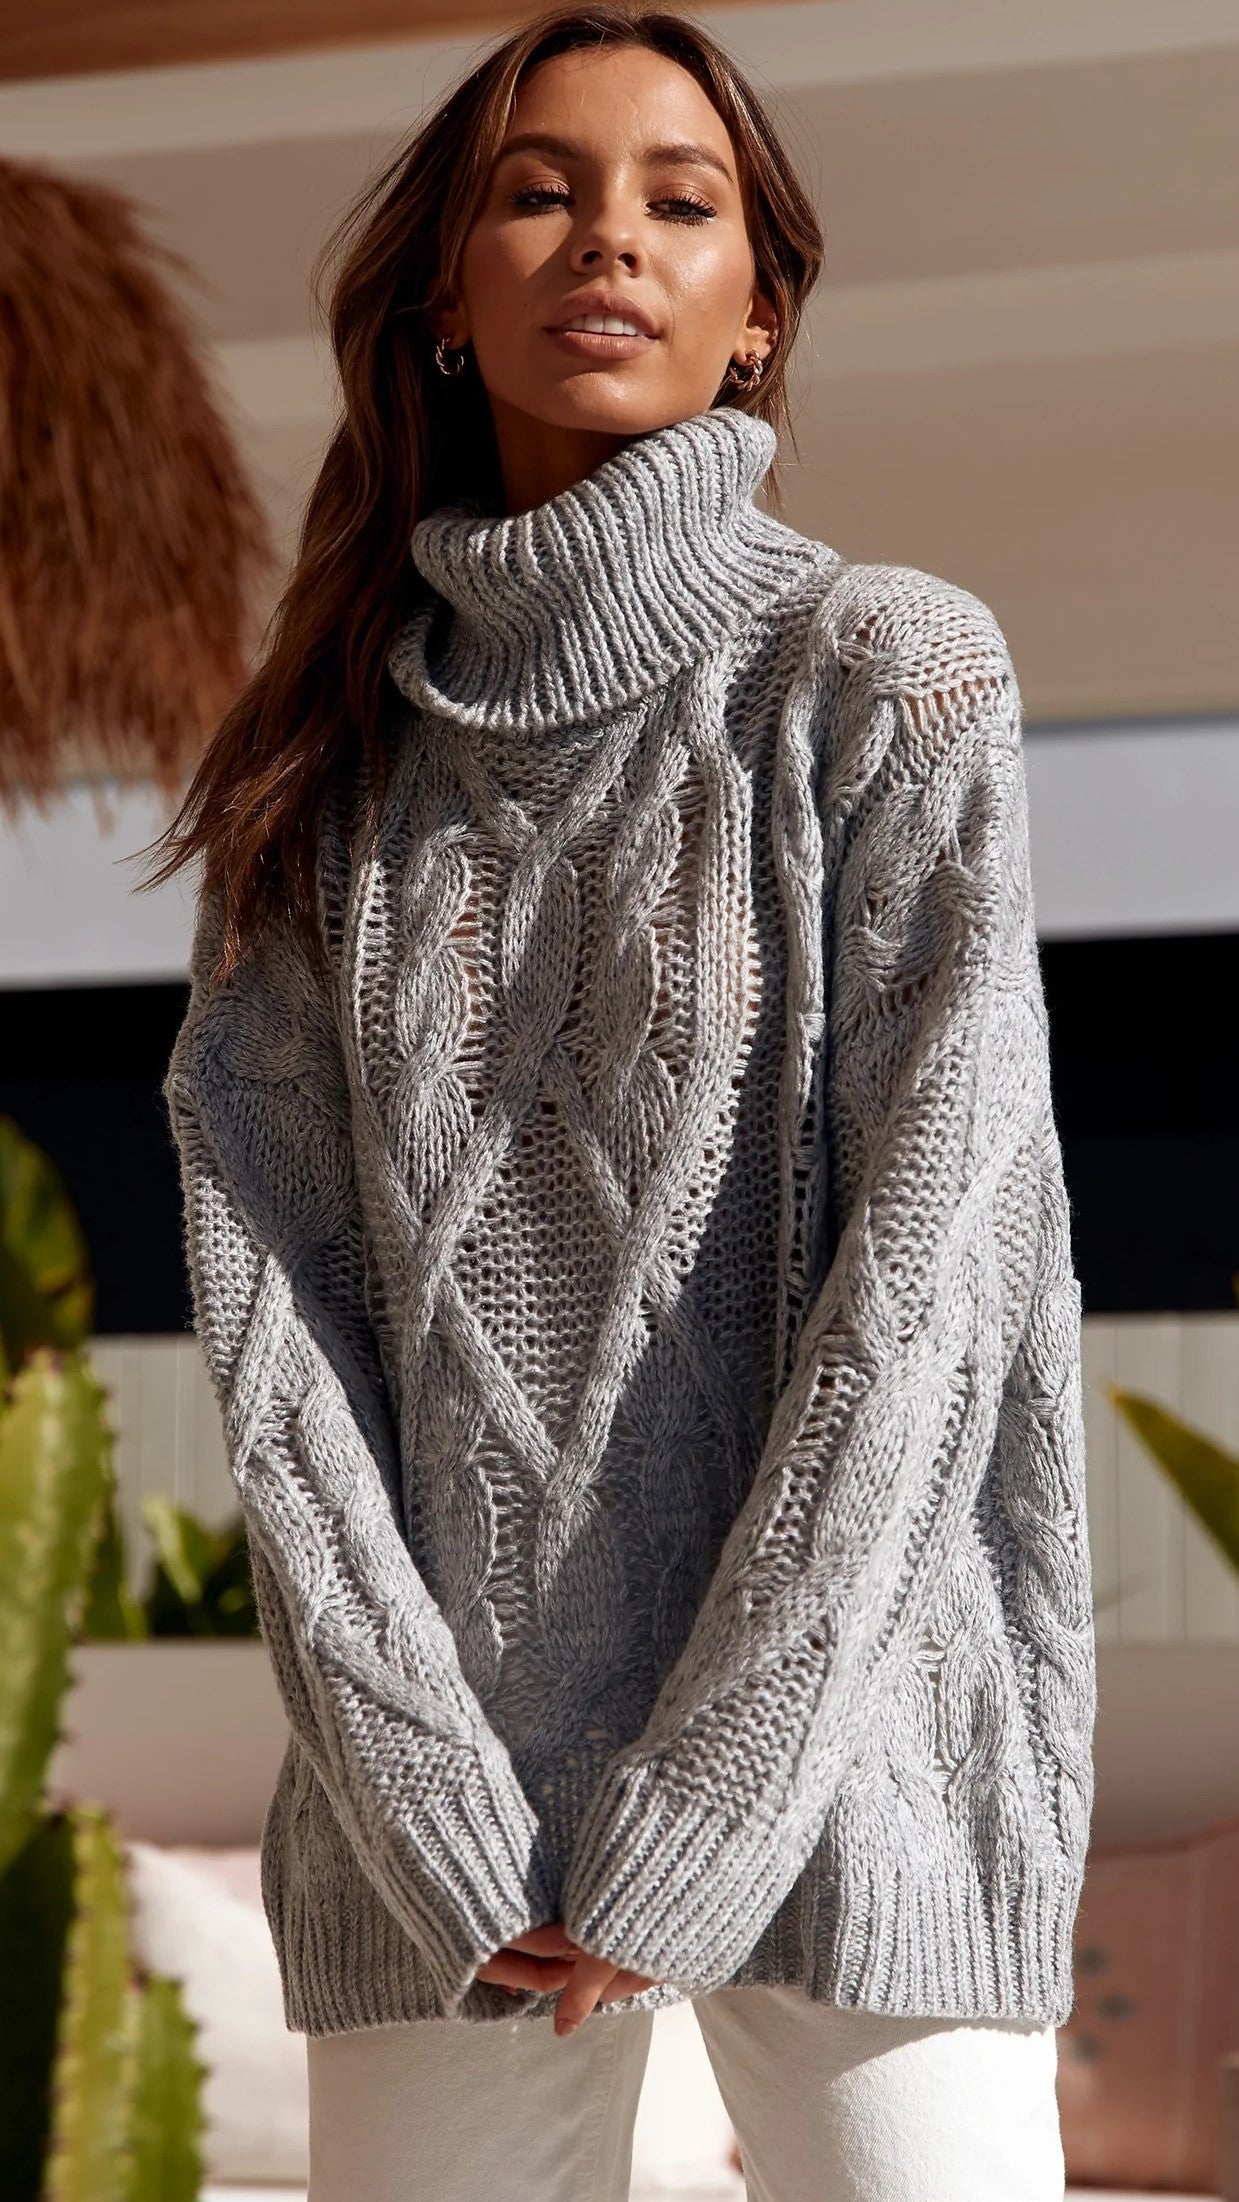 Grey Cable Knit Turtleneck Sweater